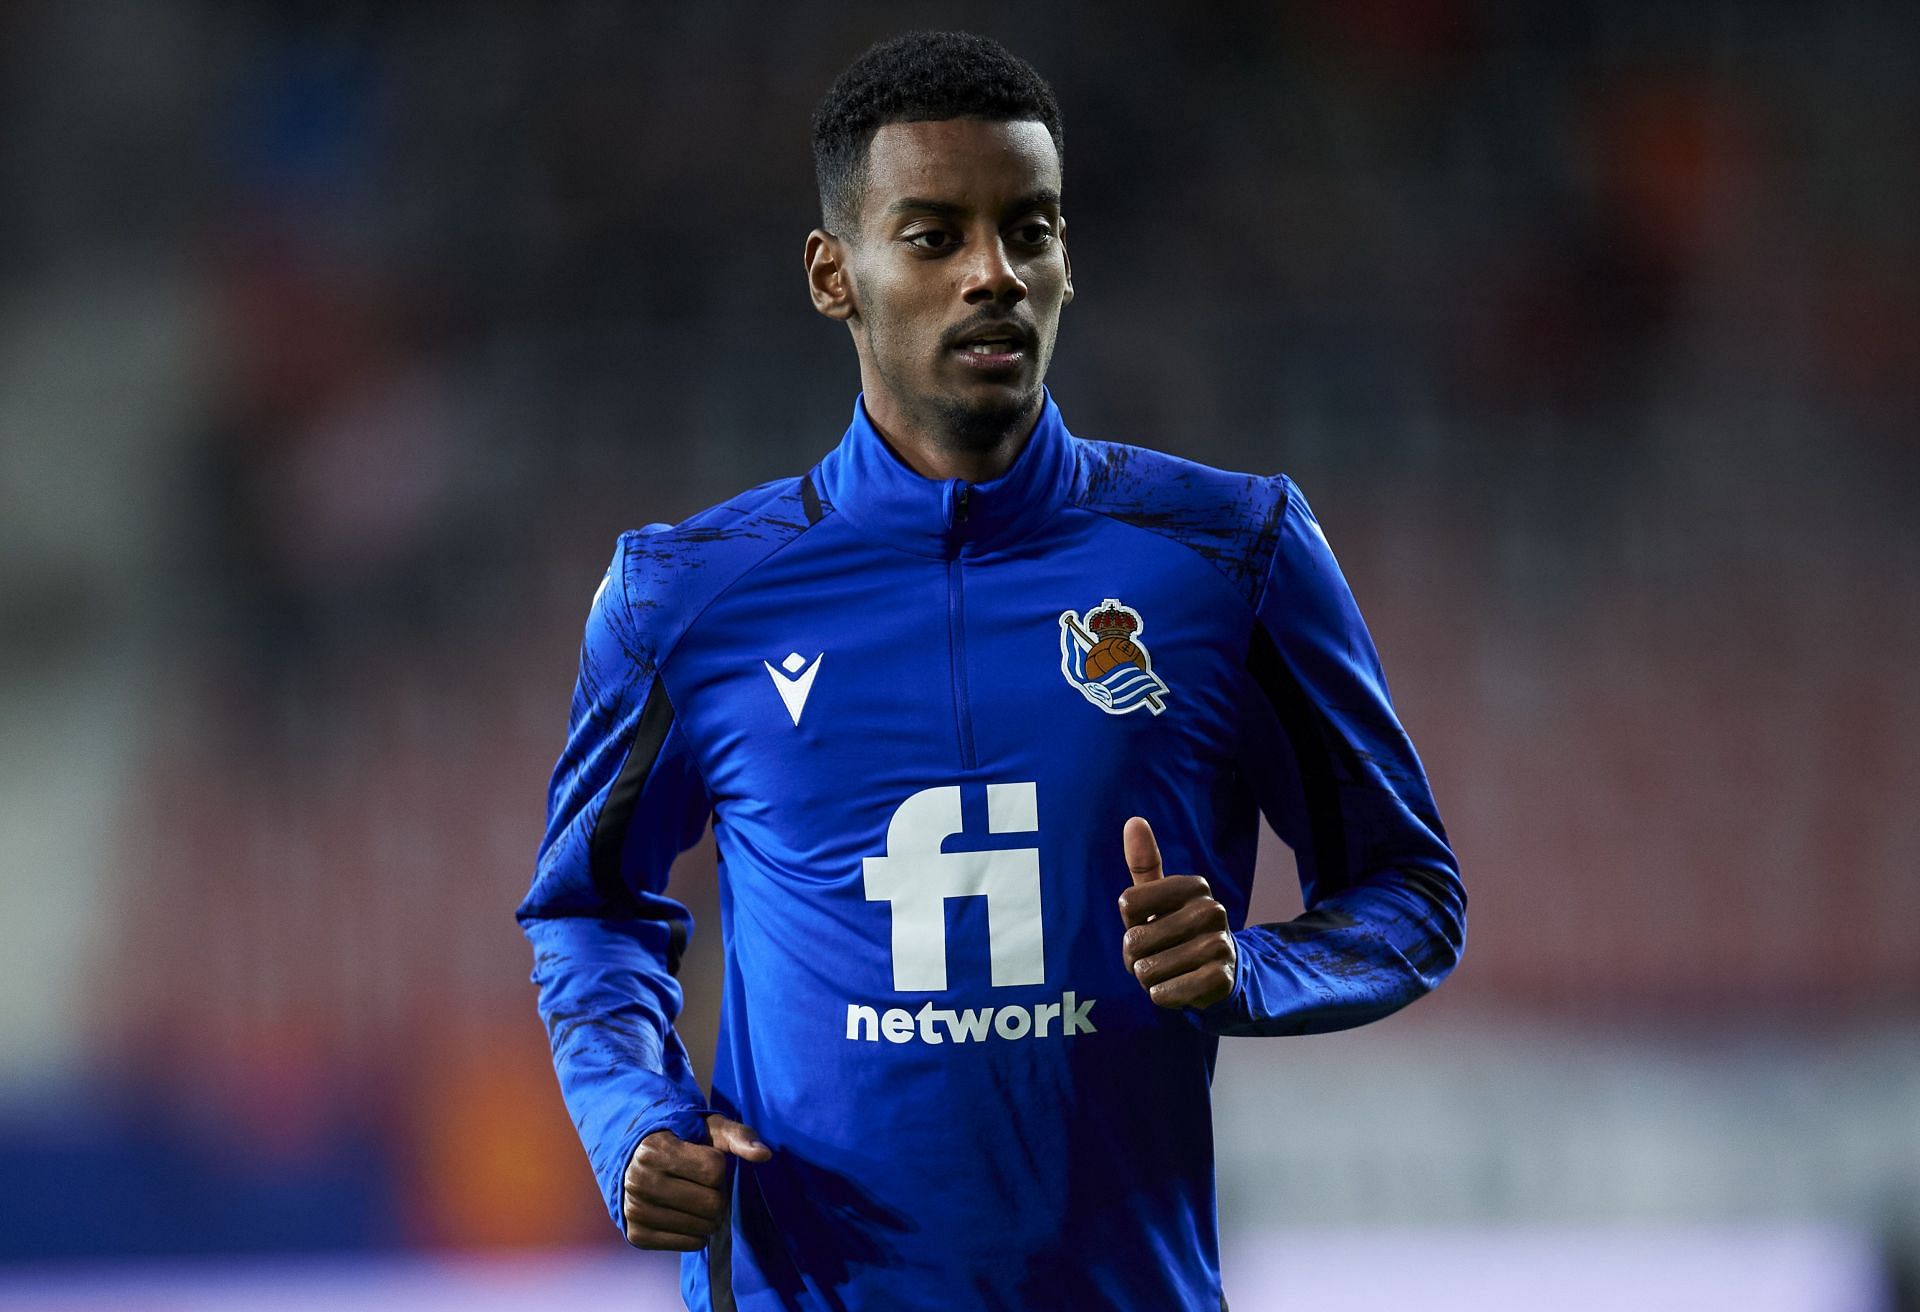 Arsenal face competition from Milan for Alexander Isak.